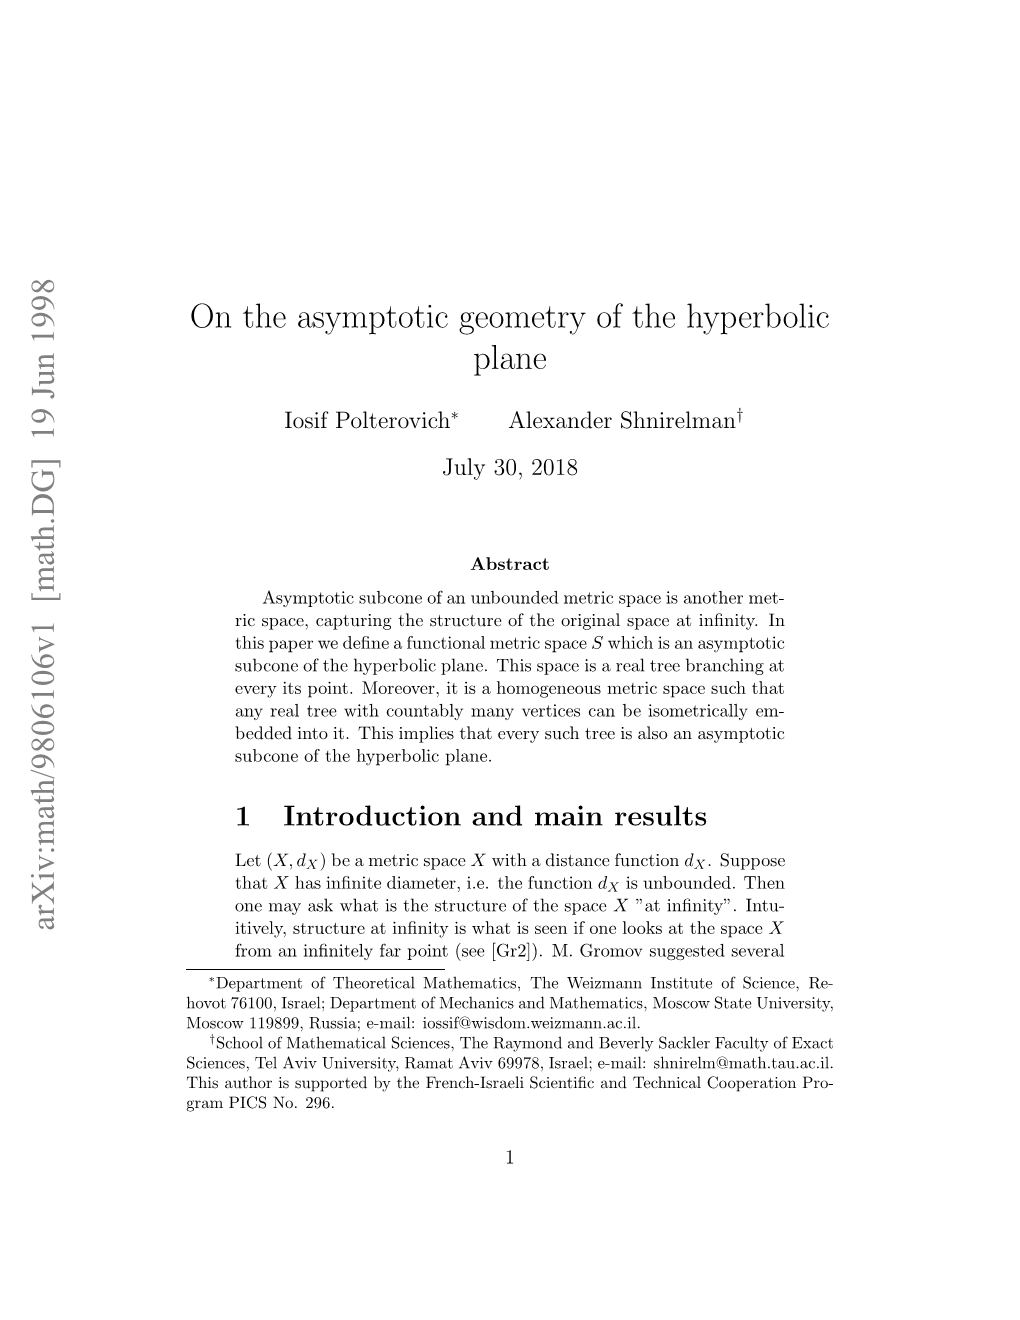 On the Asymptotic Geometry of the Hyperbolic Plane